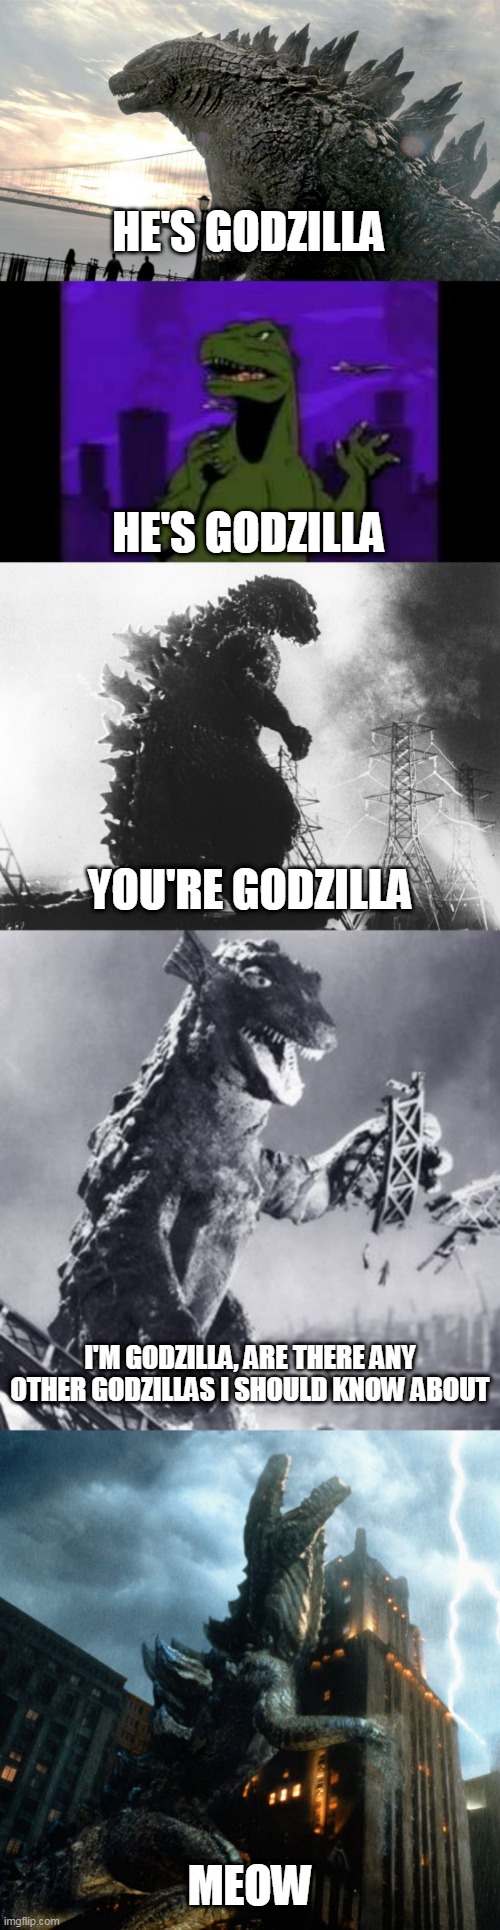 He's Godzilla He's Godzilla You're Godzilla I'm Godzilla | HE'S GODZILLA; HE'S GODZILLA; YOU'RE GODZILLA; I'M GODZILLA, ARE THERE ANY OTHER GODZILLAS I SHOULD KNOW ABOUT; MEOW | image tagged in godzilla,zilla,gorgo,godzilla 2014,godzilla 1954,godzilla 1998 | made w/ Imgflip meme maker